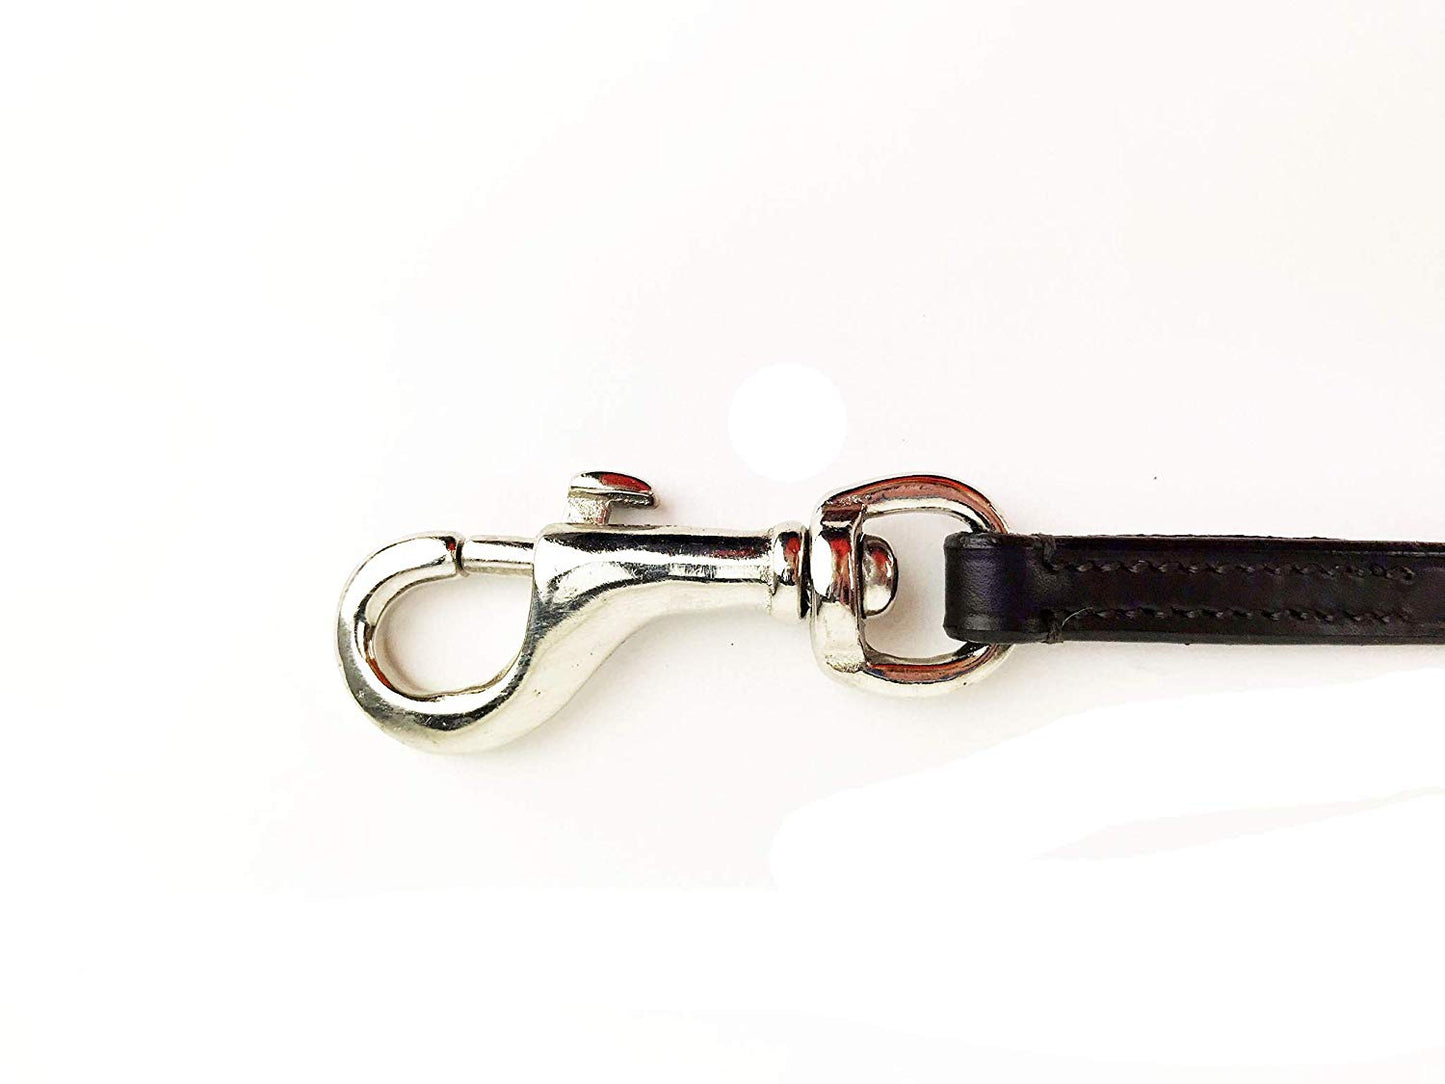 Midlee Small Leather Dog Leash